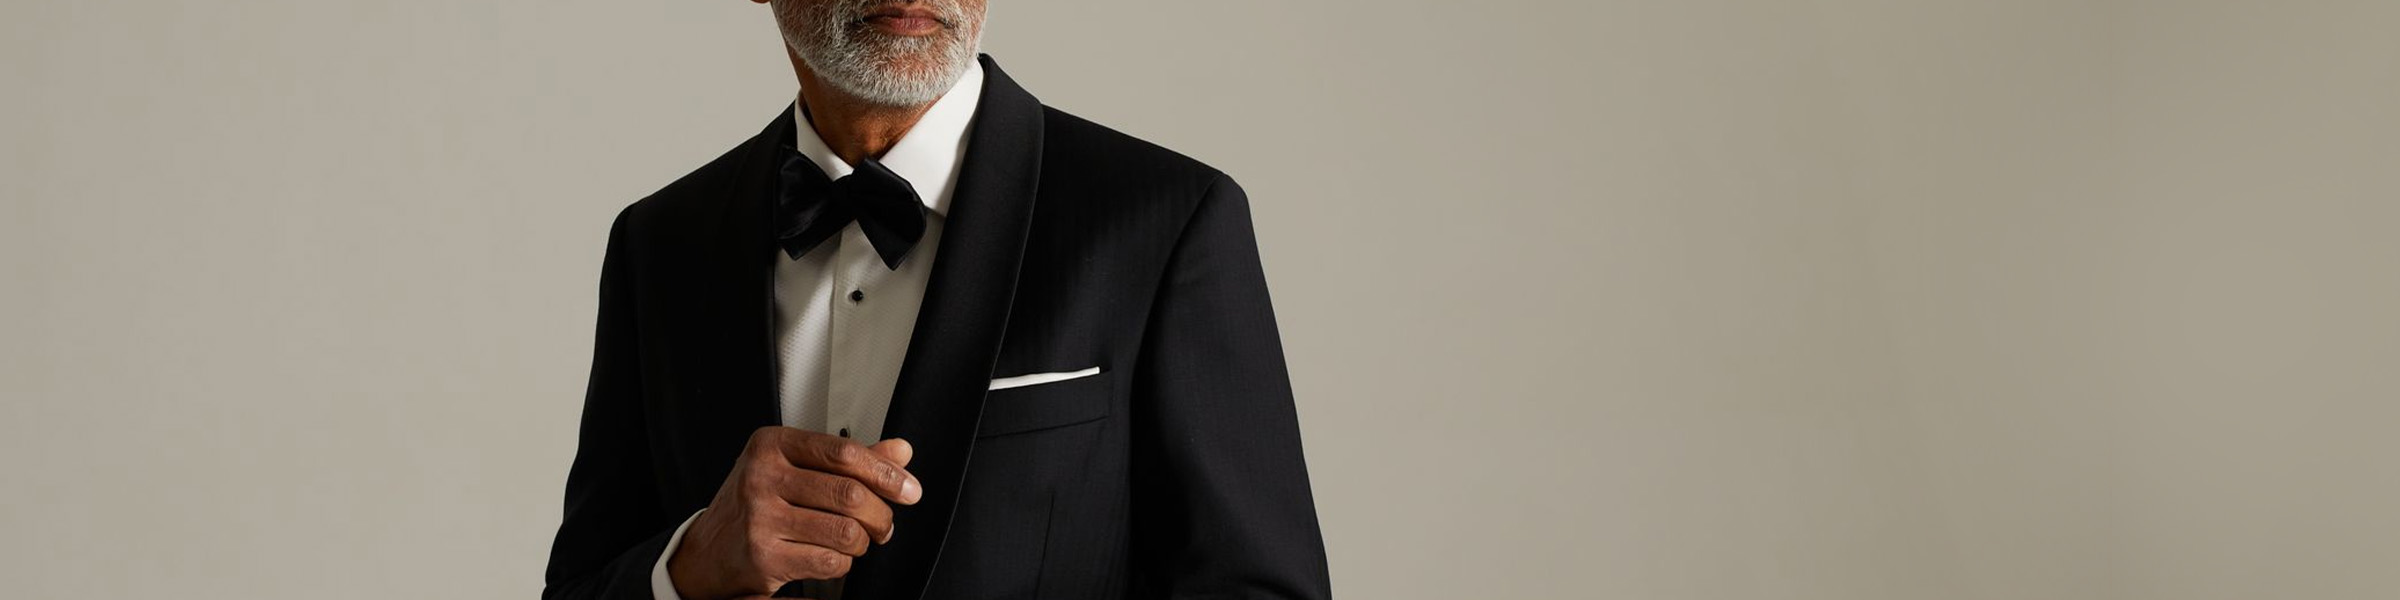 Why We Think This Dress Shirt Company Is One of the Best Values